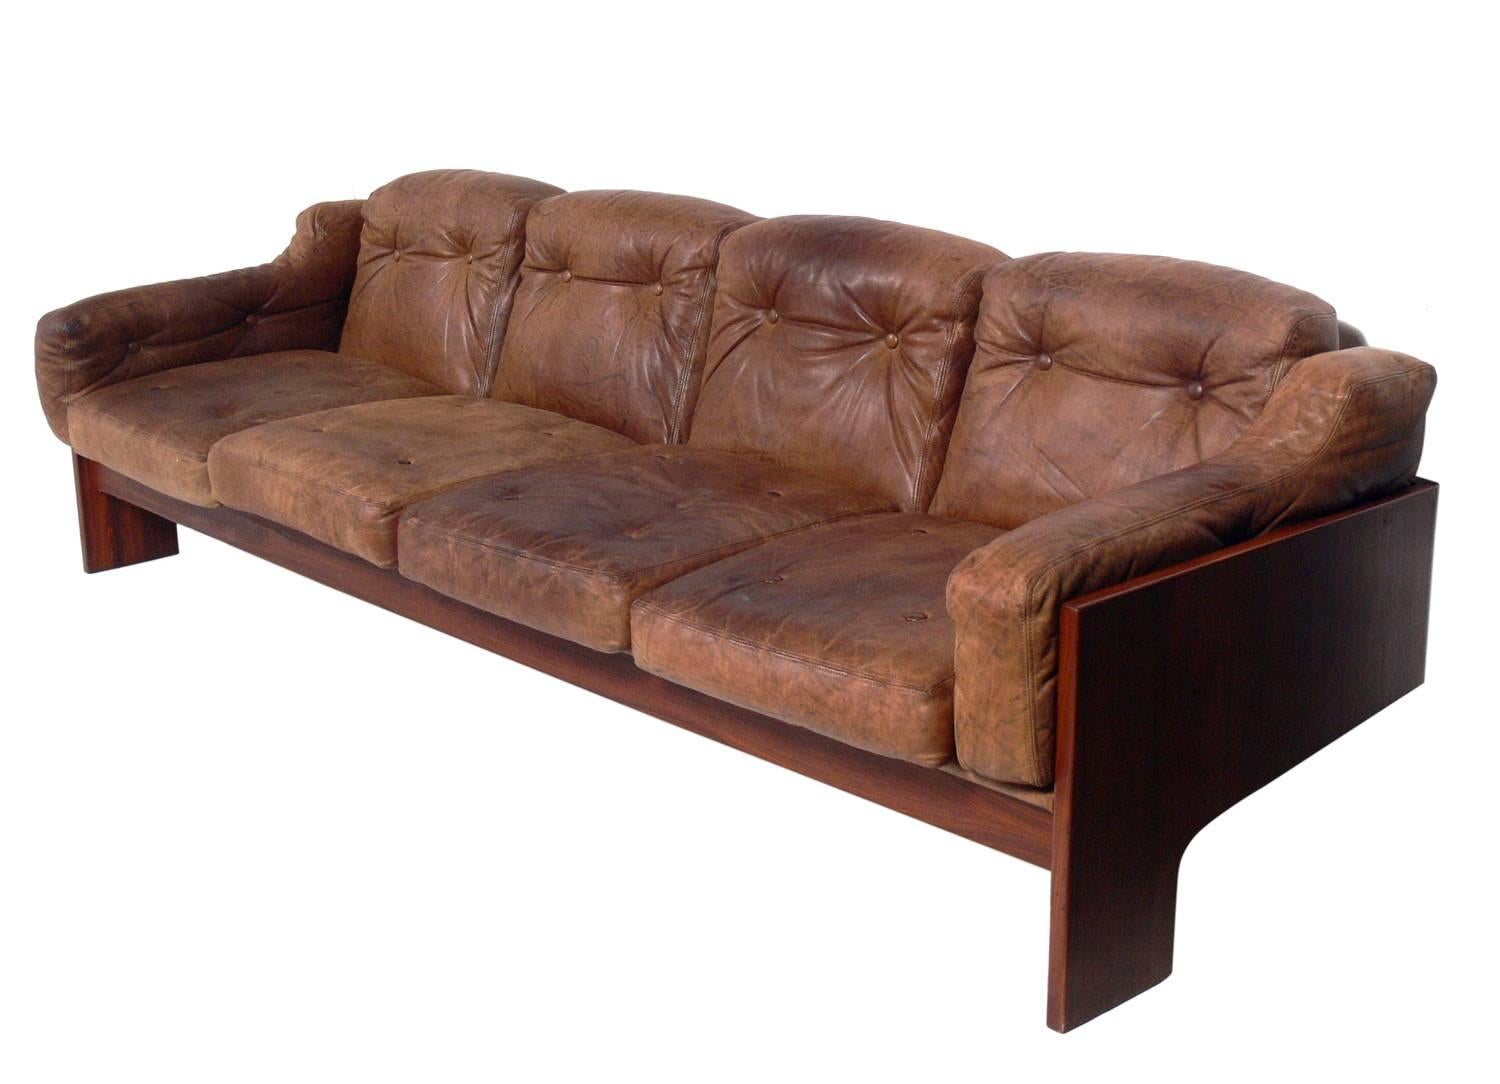 Sculptural Danish modern rosewood and leather sofa, Denmark, circa 1960s. It retains it's original natural color leather cushions. If you prefer, we can reupholster the cushions in your fabric for an additional charge.